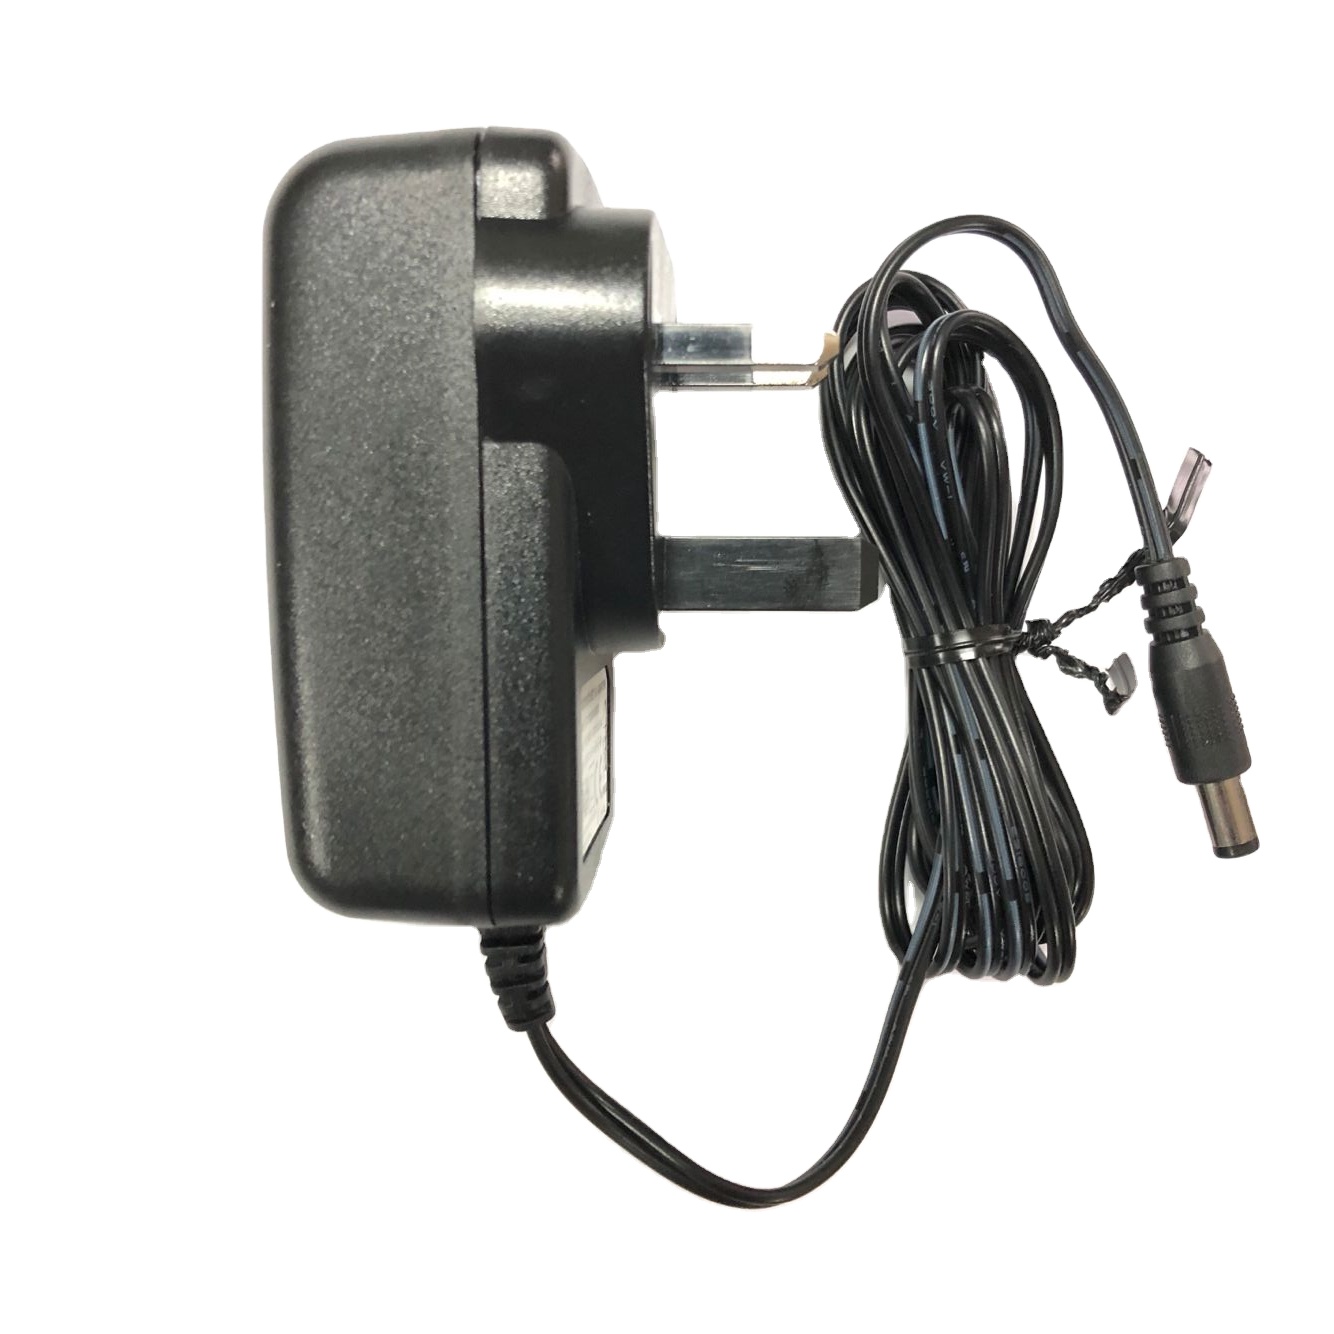 DC 26V 400MA 0.4A power adapter charger for Vax Slim Vac 22.2V  and Hoover freedom FD22 series charger